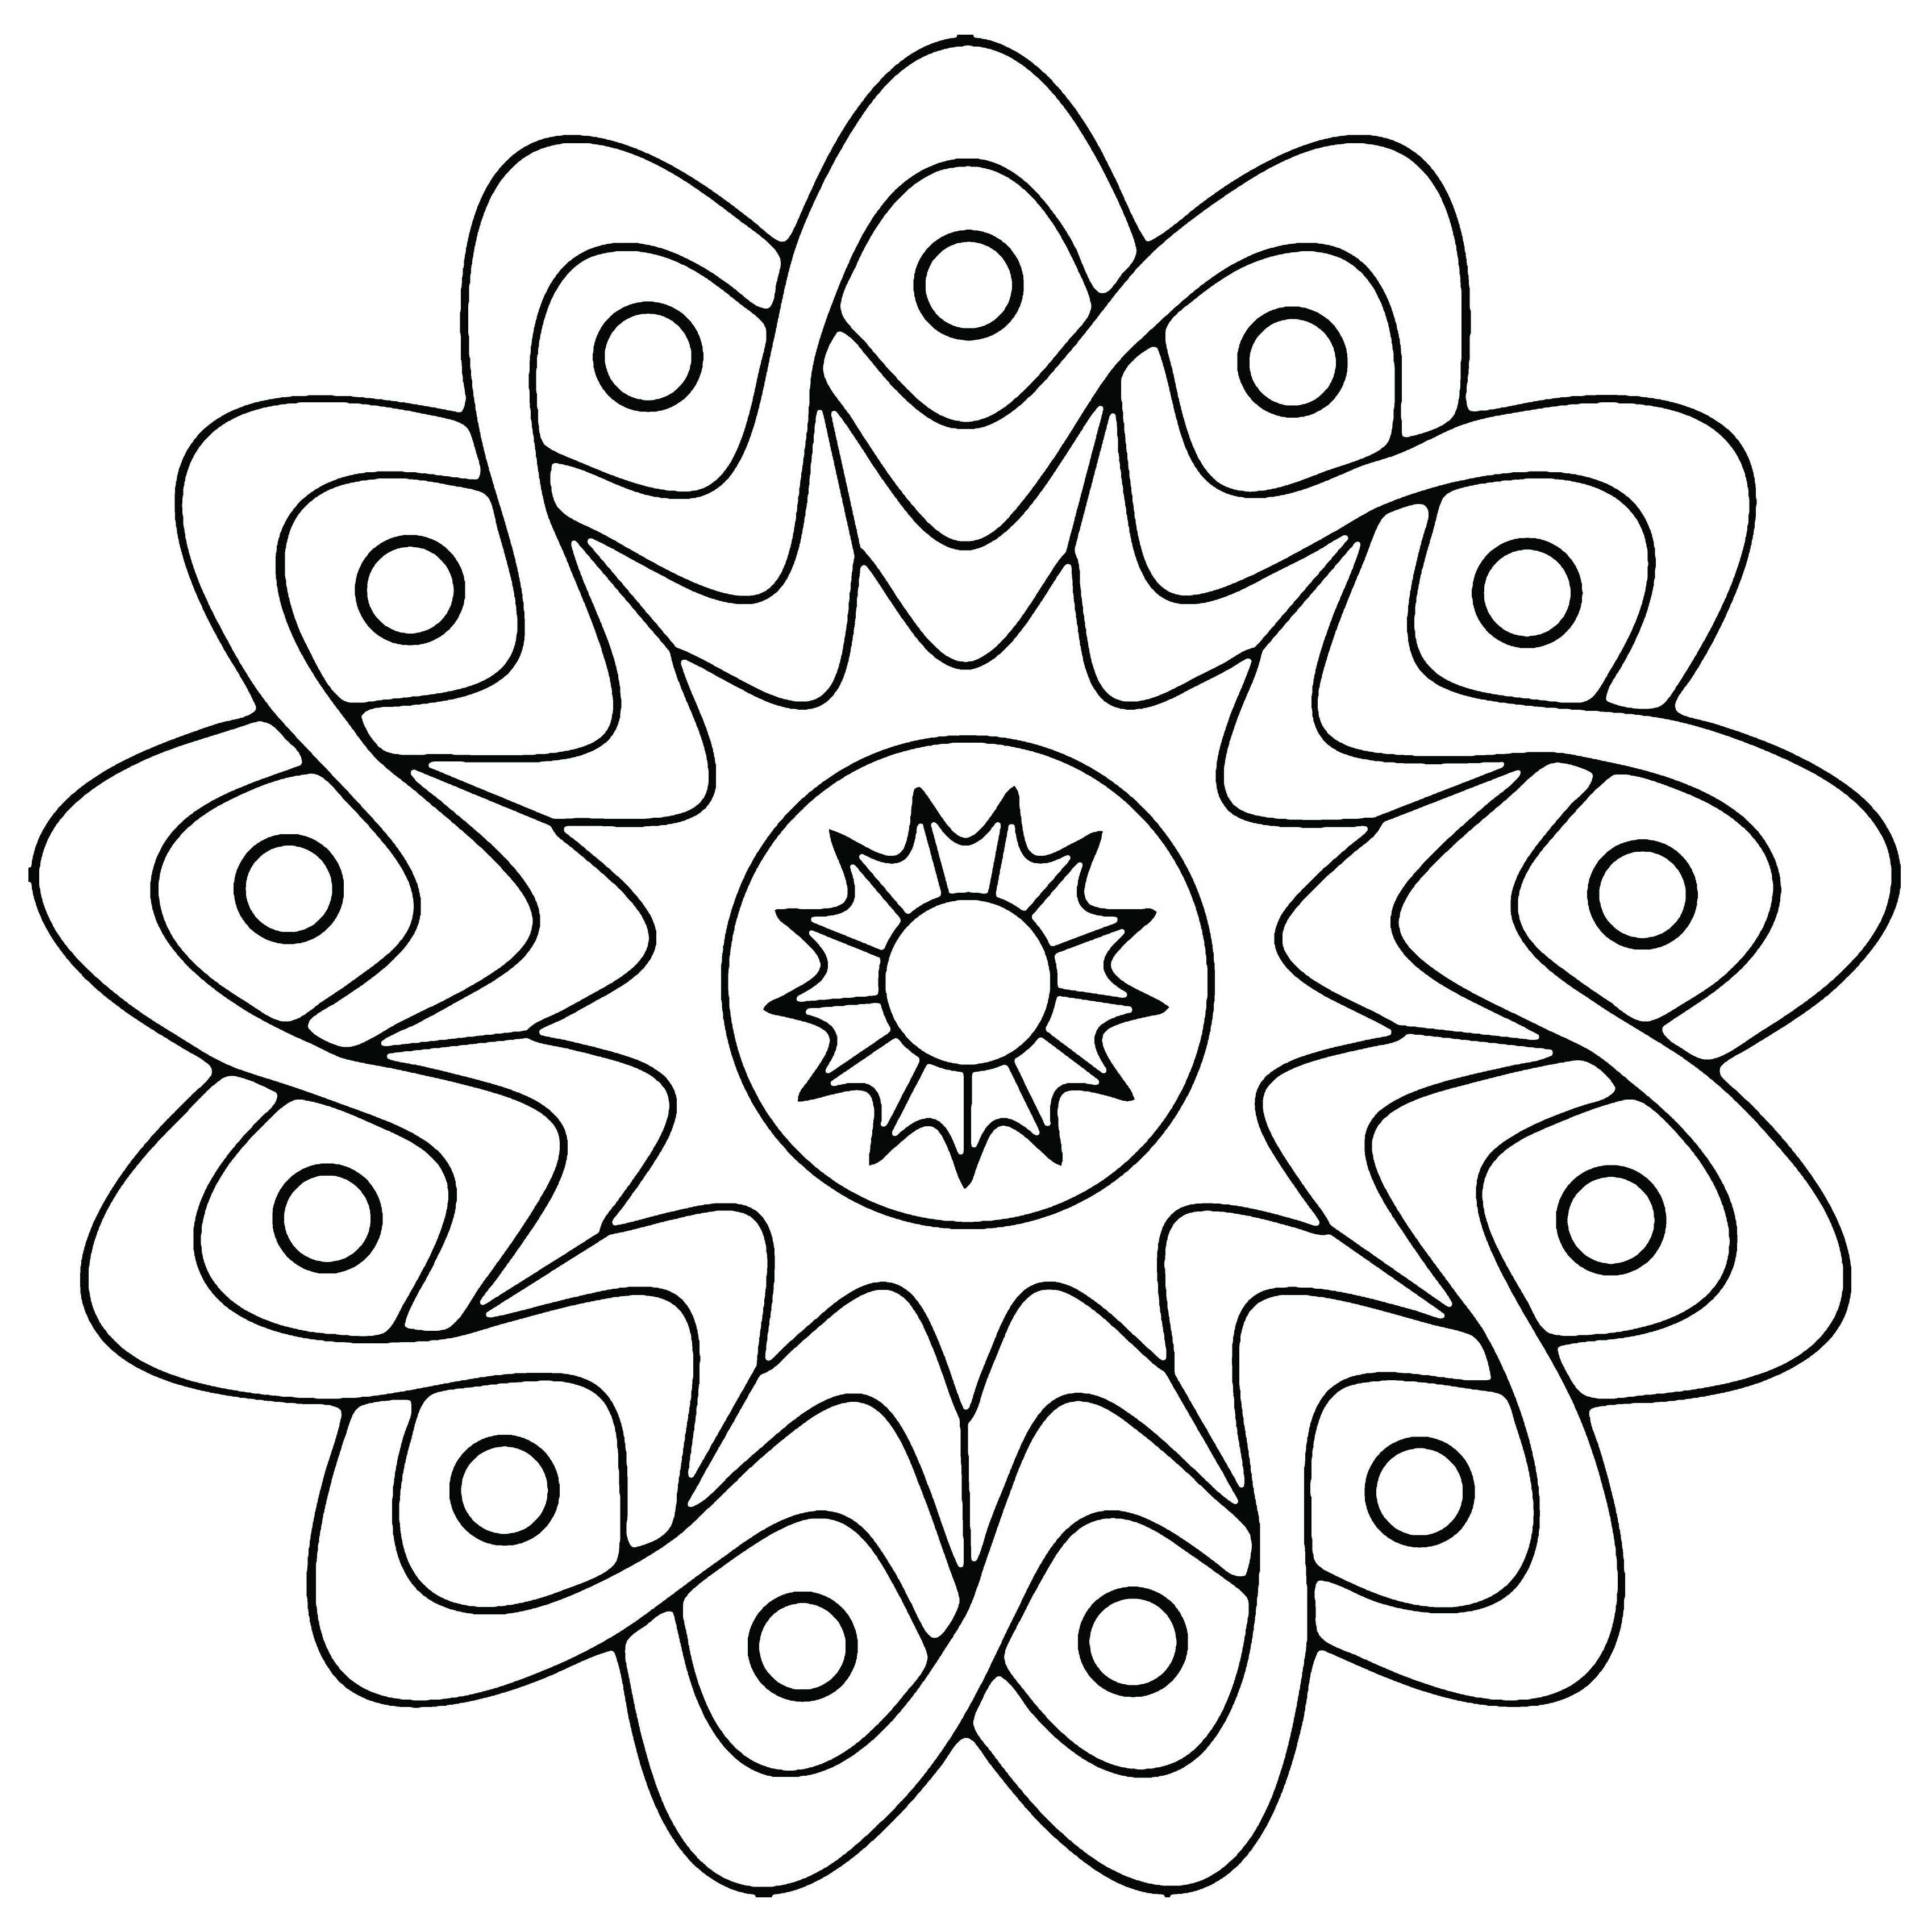 Simple Adult Coloring Books
 Free Printable Geometric Coloring Pages For Kids